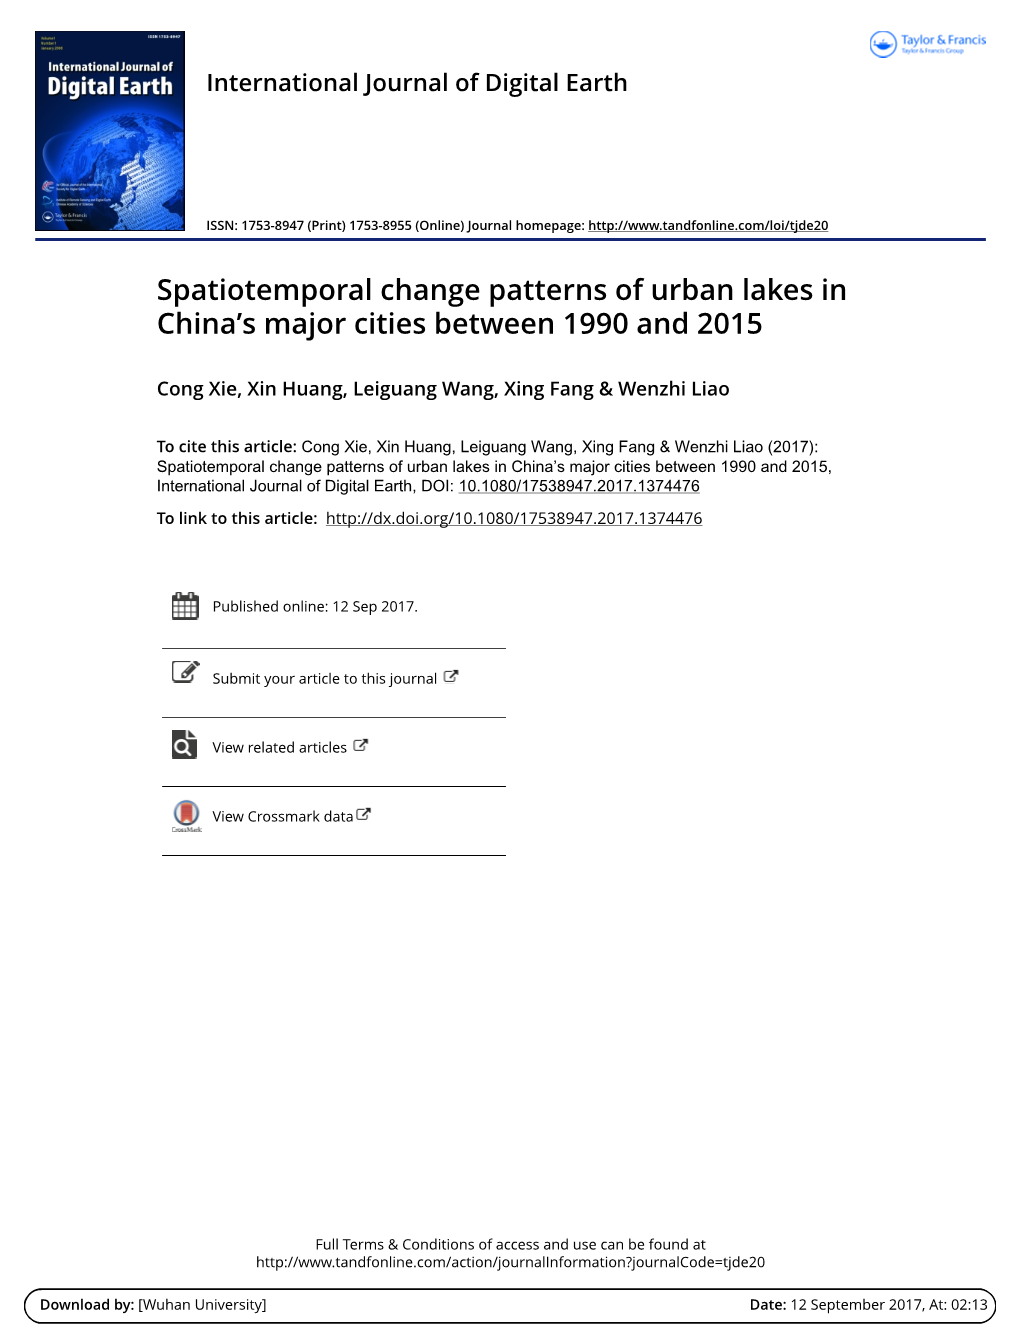 Spatiotemporal Change Patterns of Urban Lakes in Chinas Major Cities